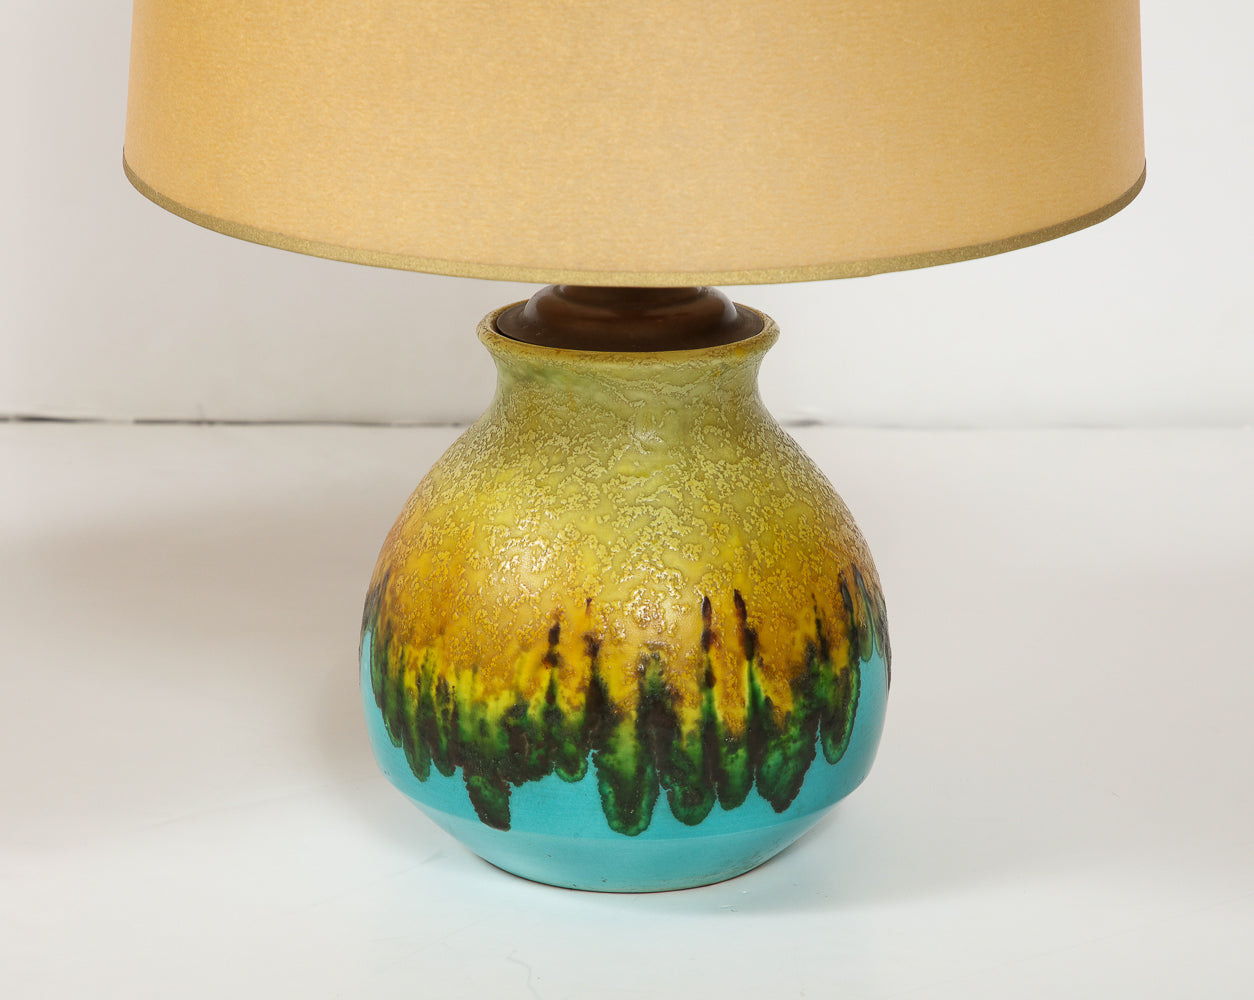 Pair of Ceramic Table Lamps by Marcello Fantoni